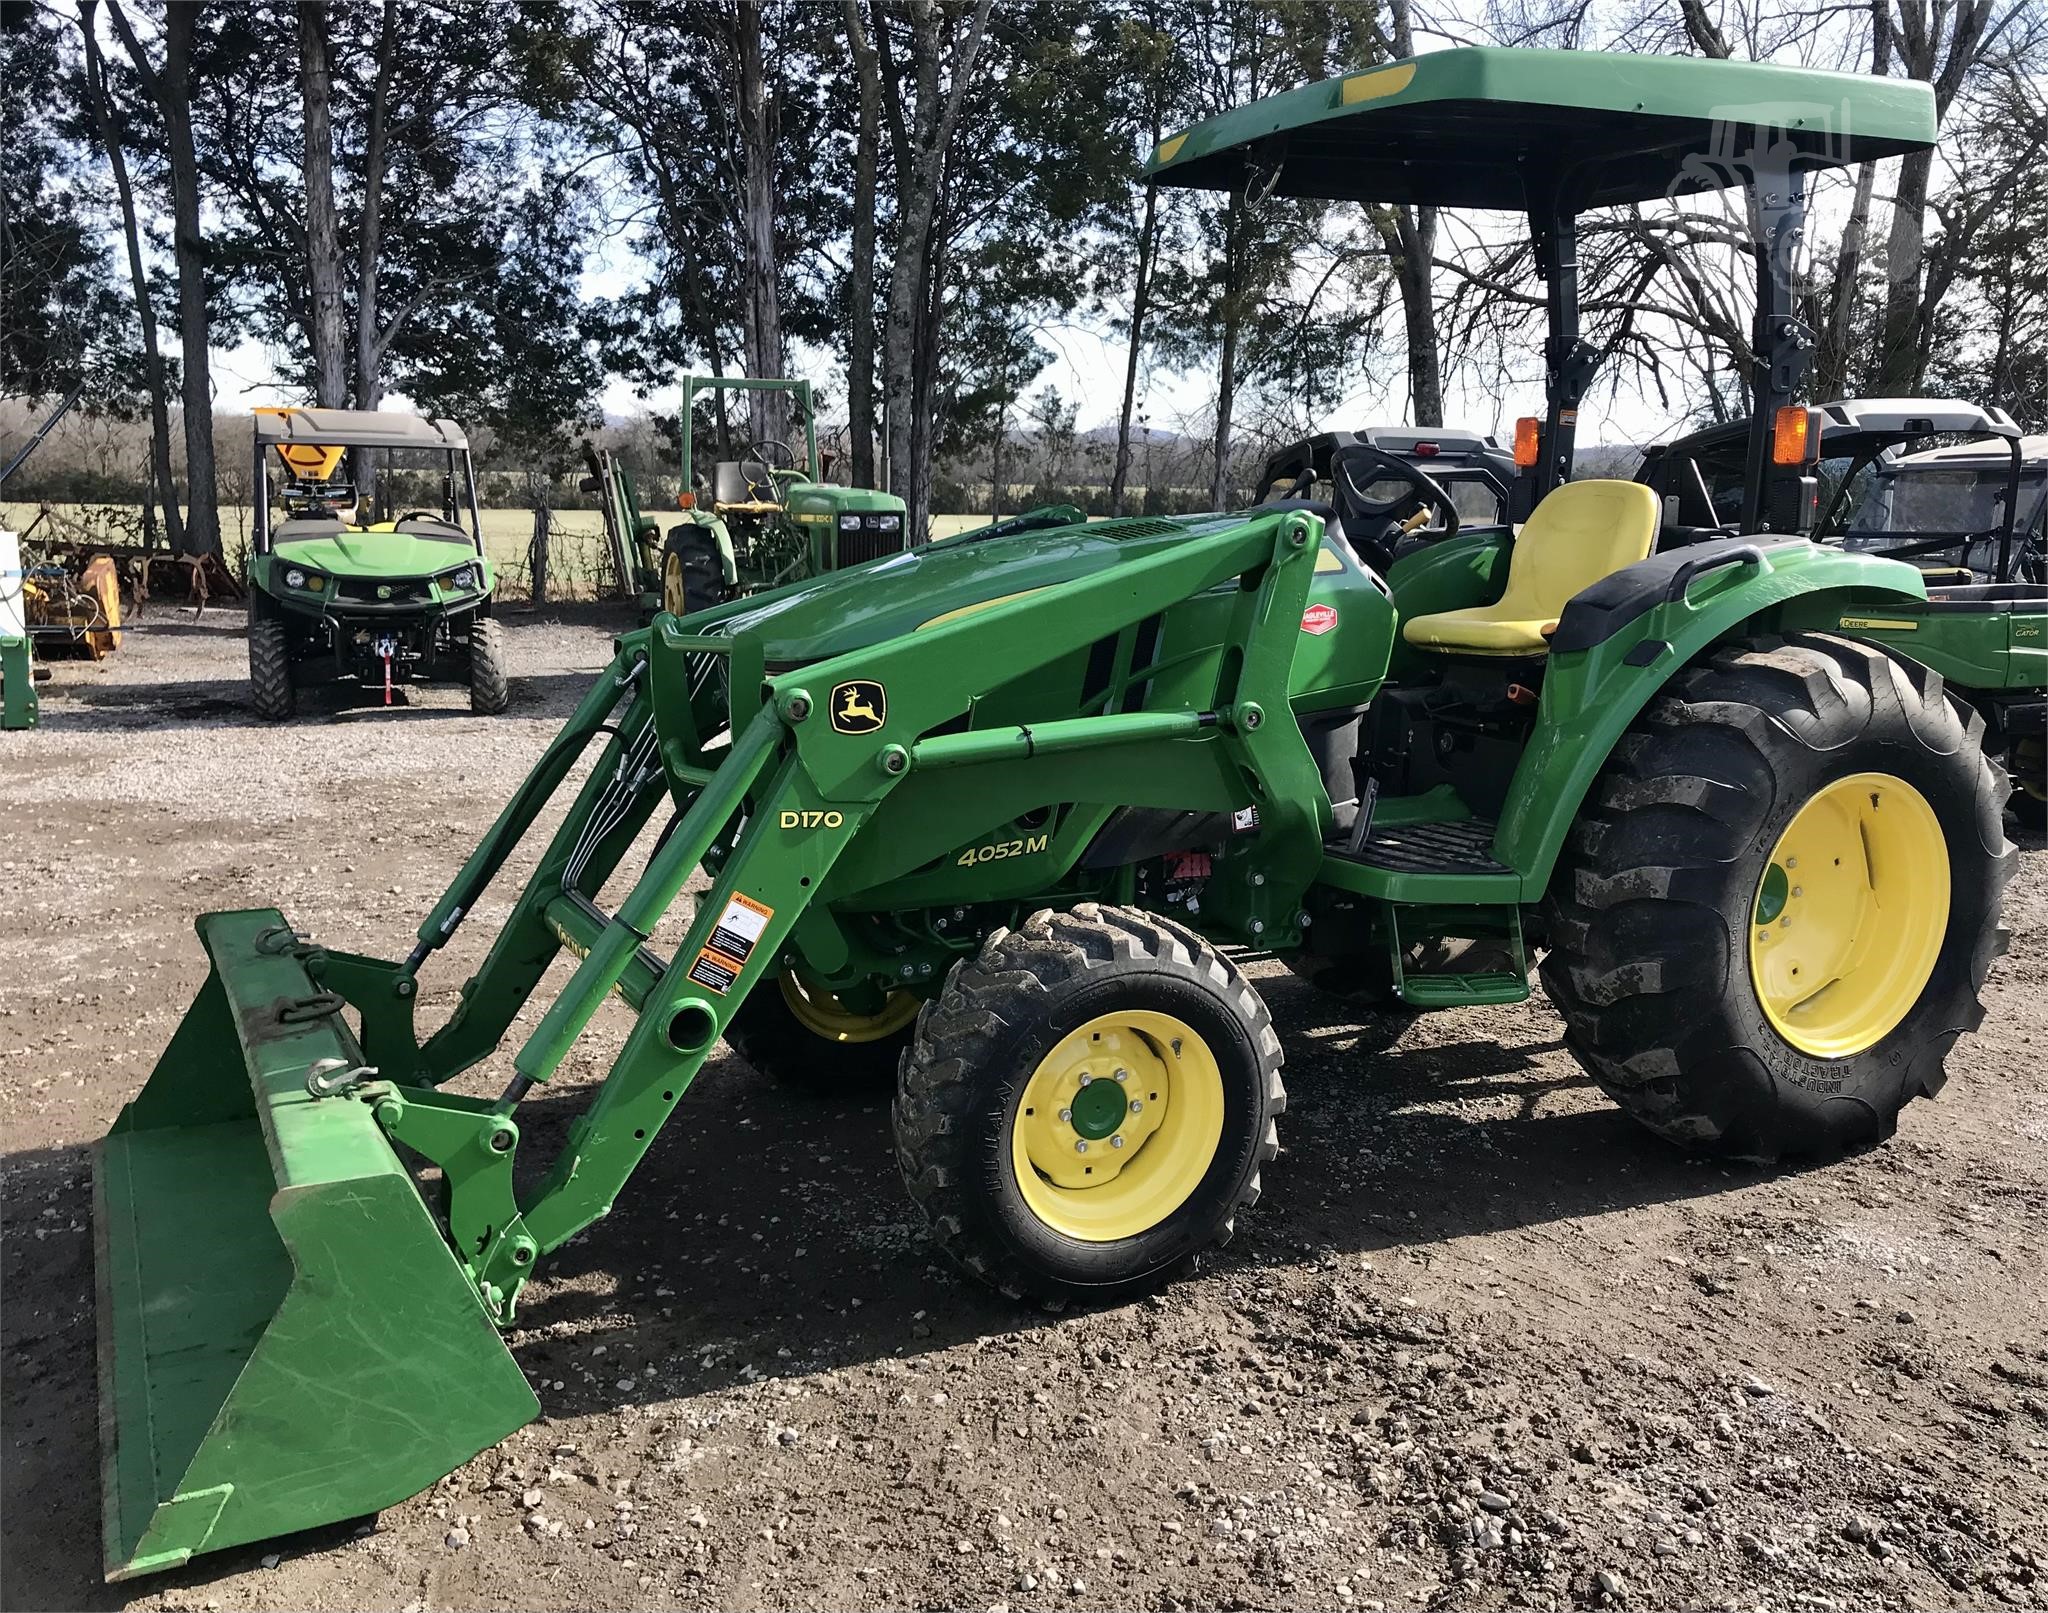 John Deere 4052m For Sale 15 Listings Tractorhouse Com Page 1 Of 1